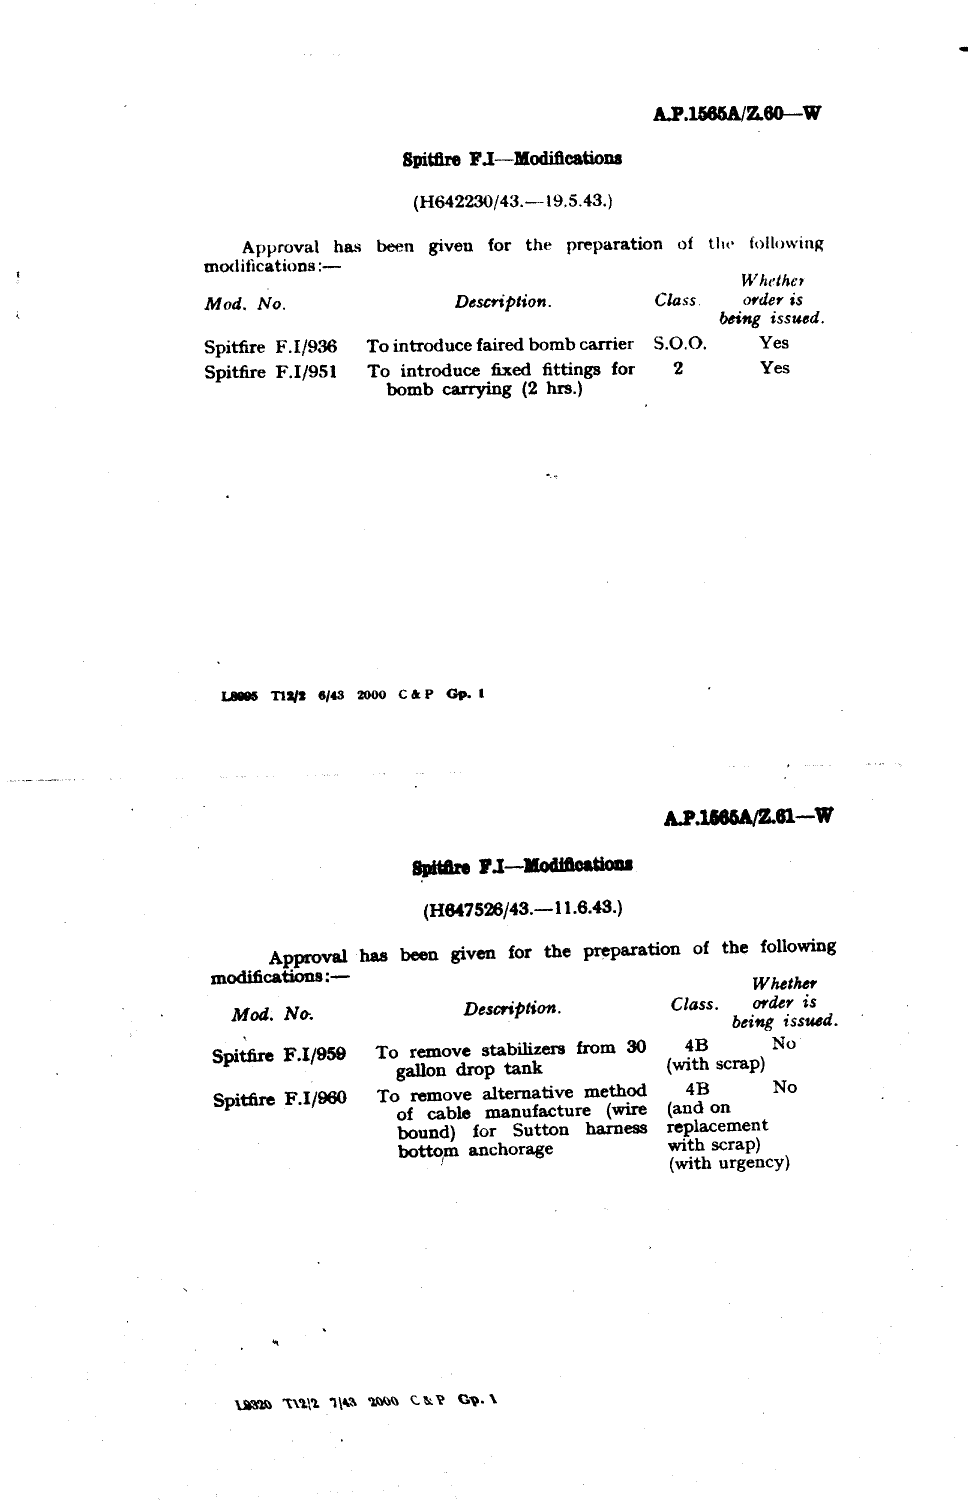 Sample page 1 from AirCorps Library document: Spitfire F.I Modifications 959 and 960